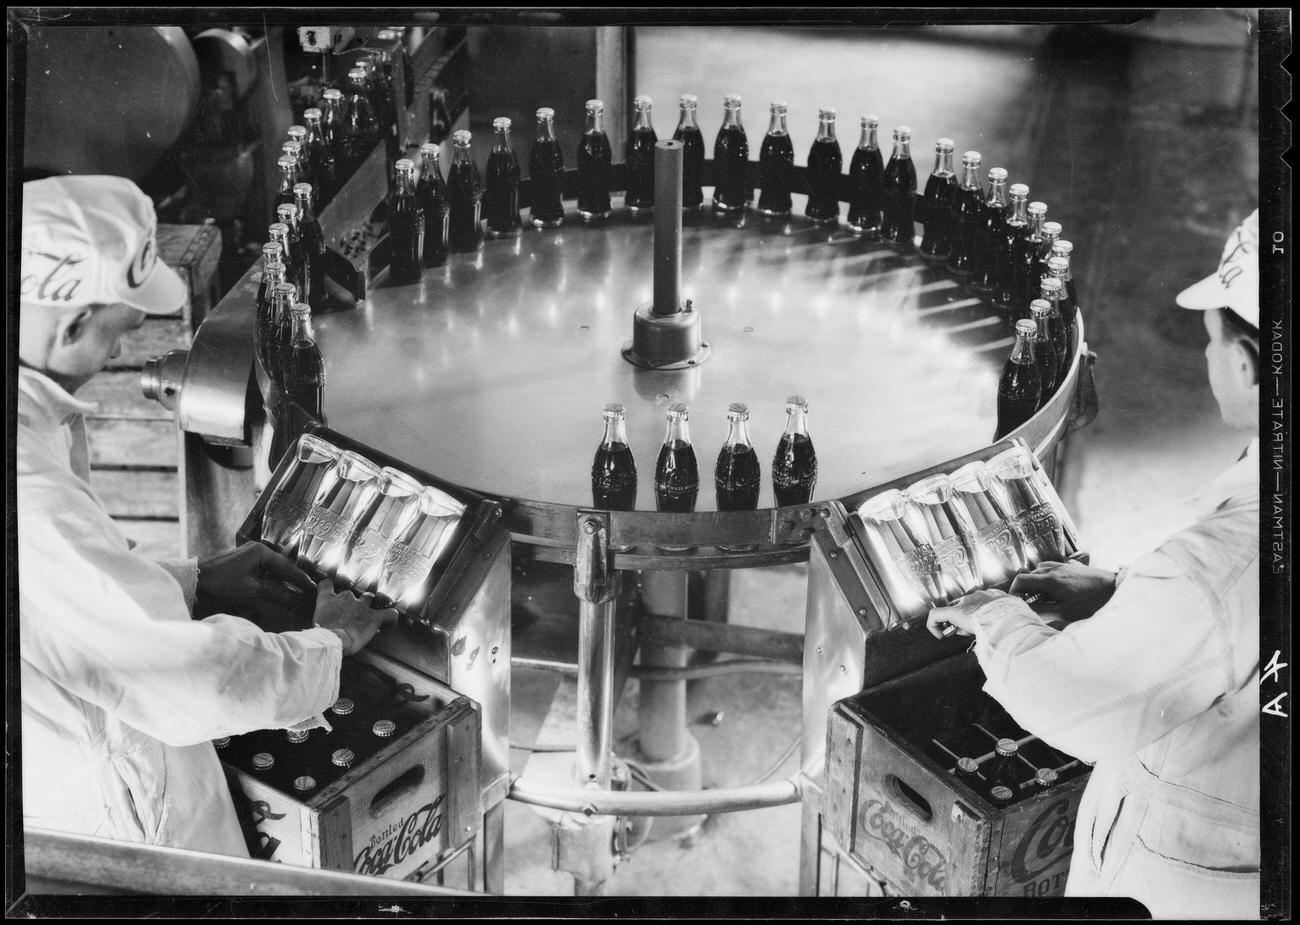 Men inspecting bottles at a Coca-Cola plant in Los Angeles.